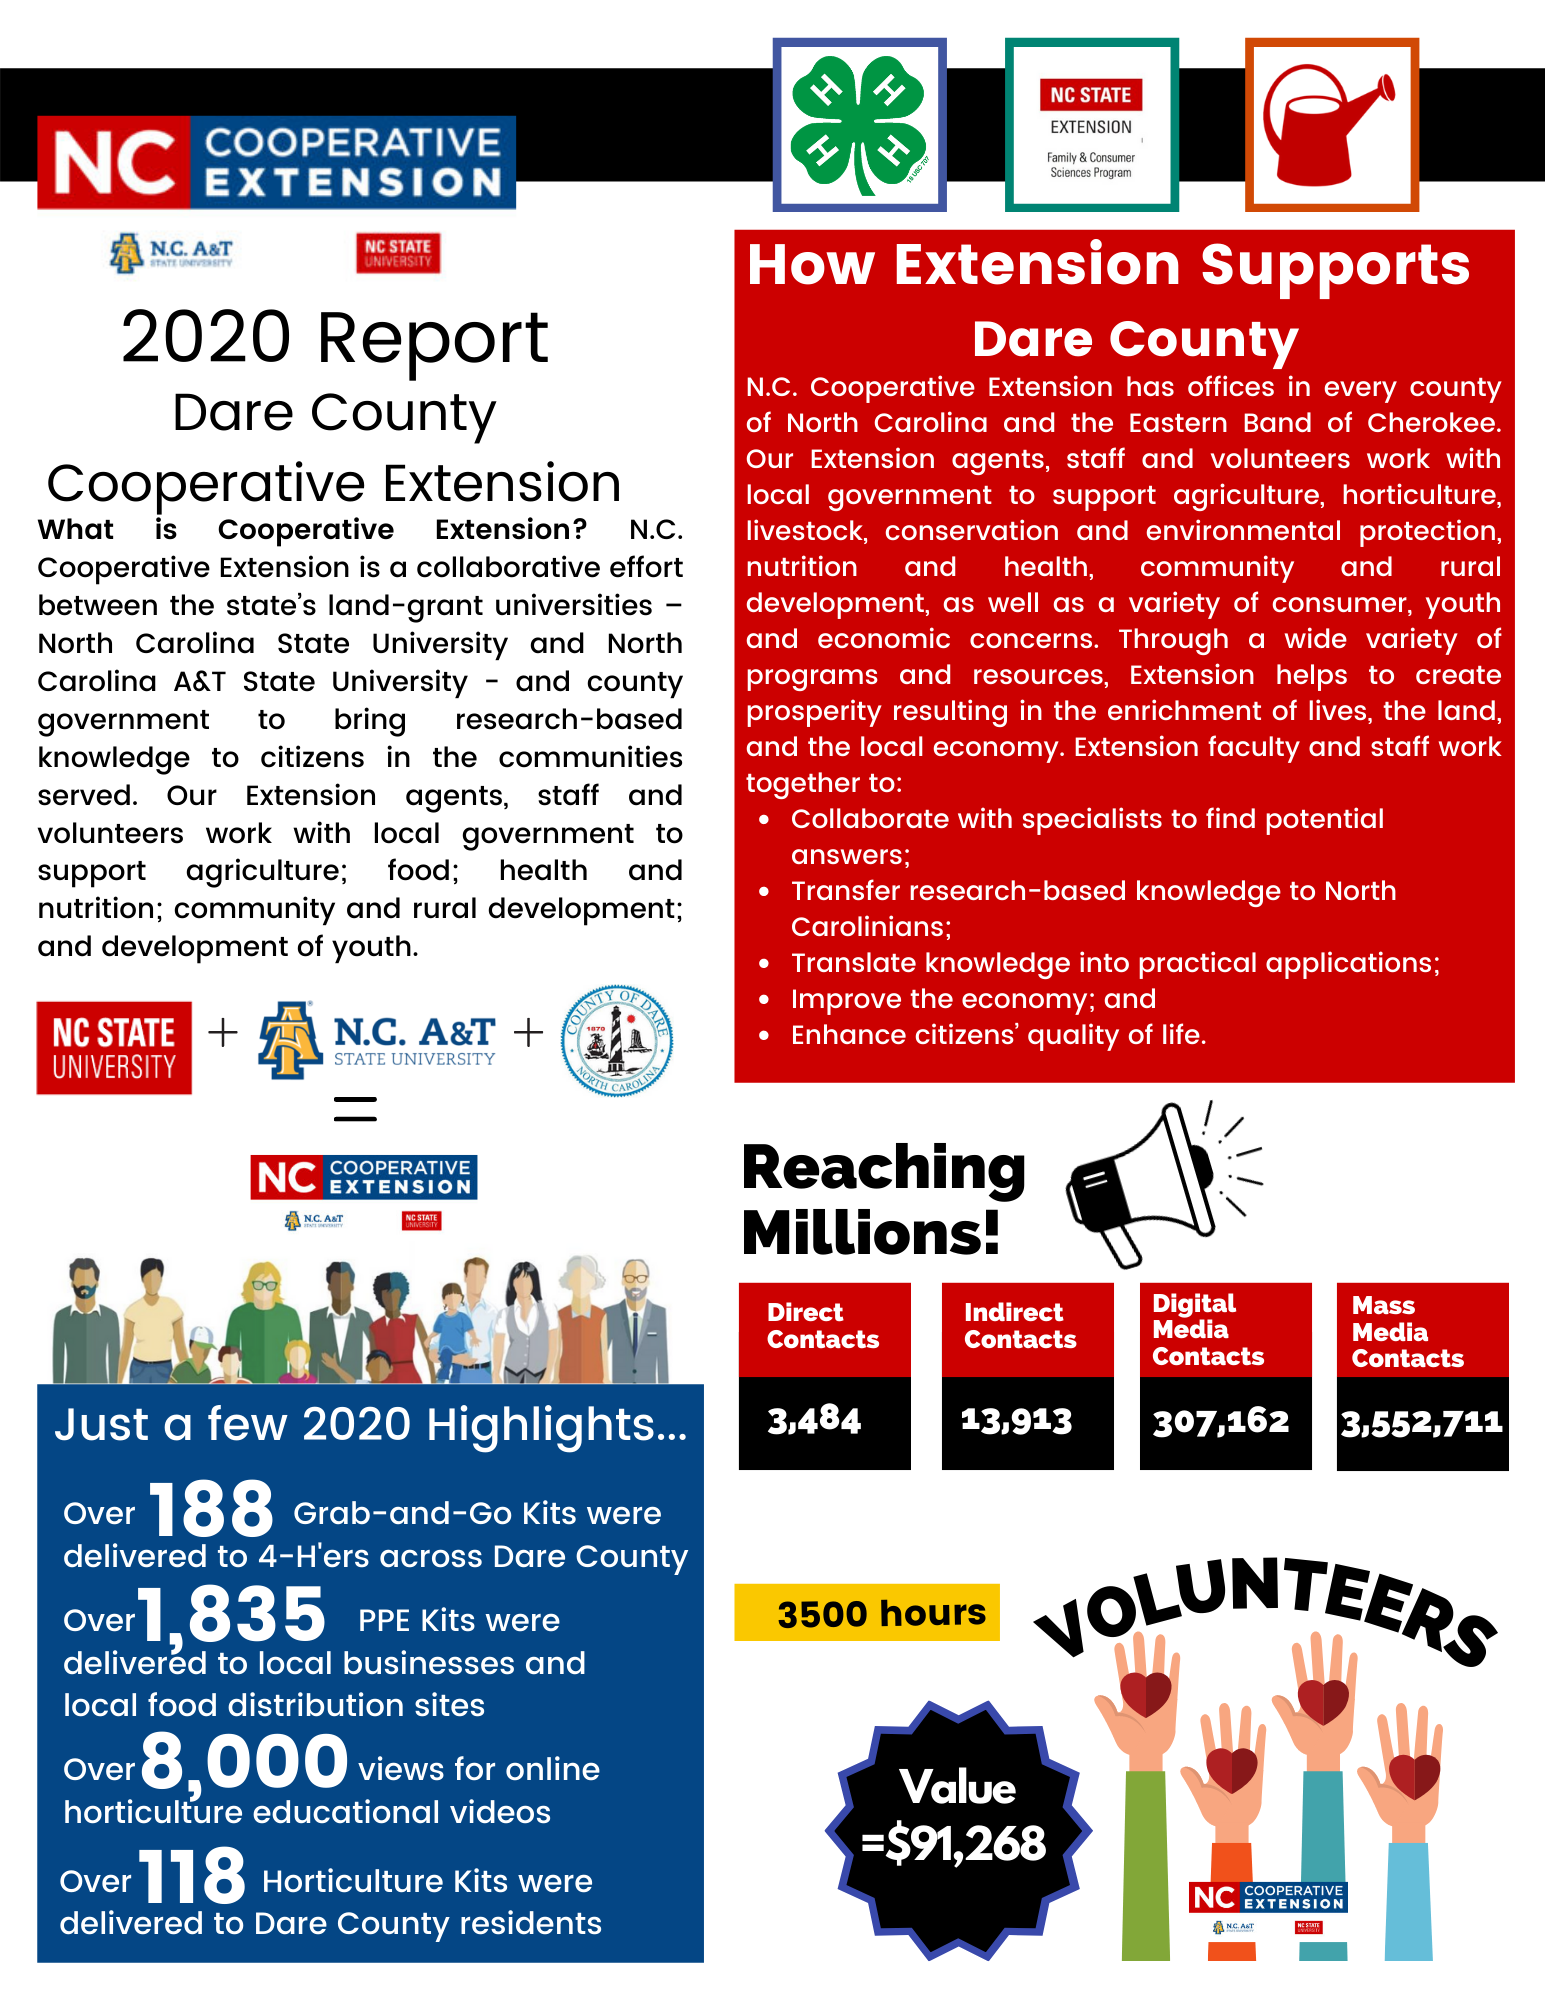 2020 Dare County Report flyer image